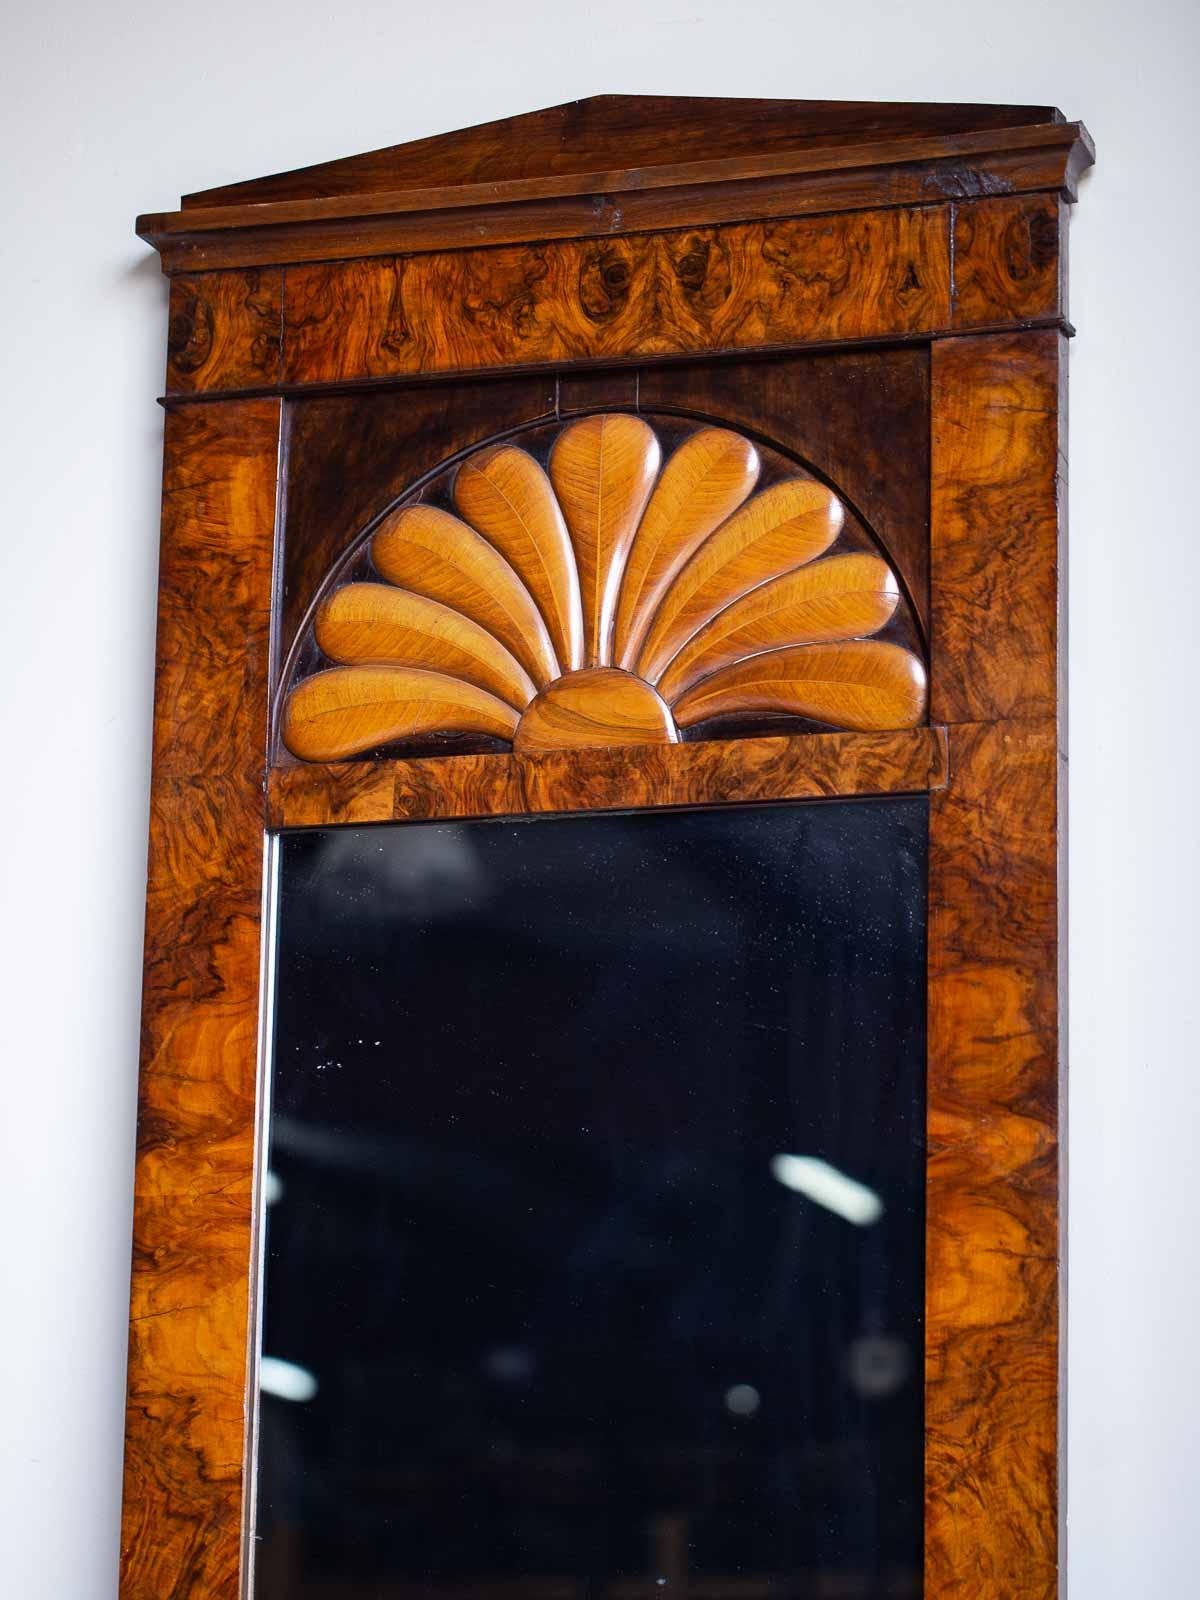 This tall Biedermeier antique German burl walnut mirror circa 1830 has a tall and slender shape and was originally placed between a pair of windows in an upscale Berlin residence. The beautiful grain of the superb walnut provides a delightful